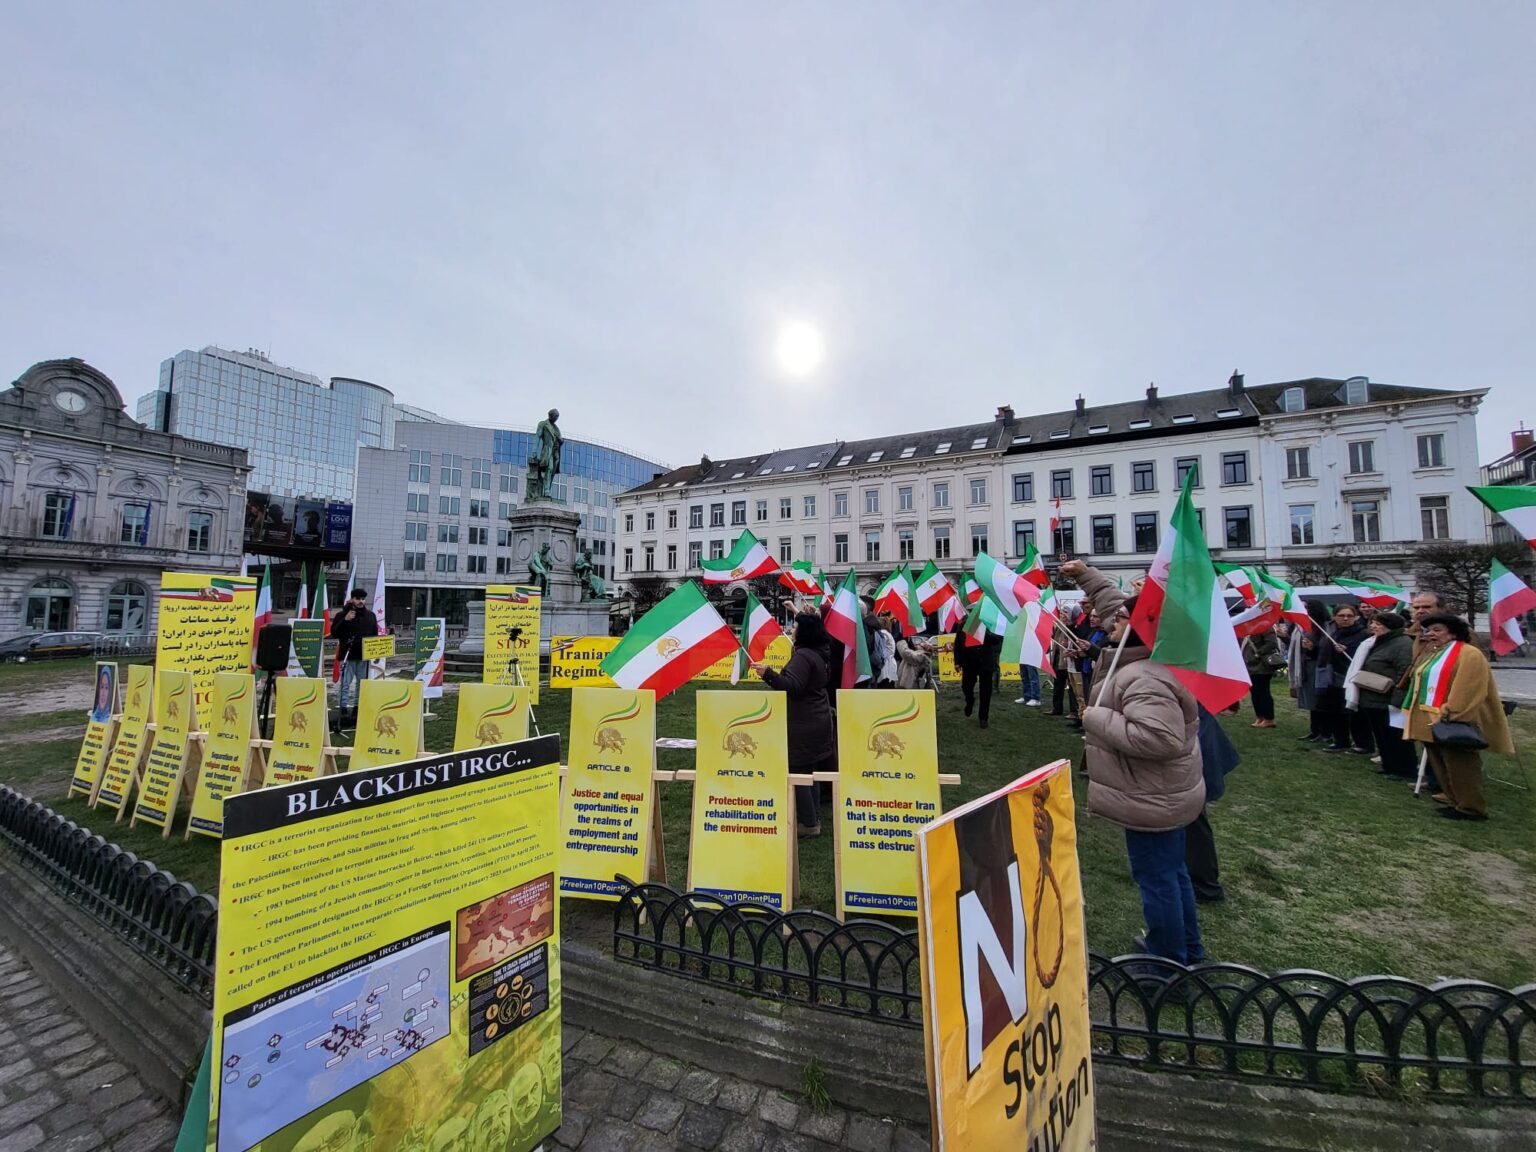 Iranian diaspora rally in Brussels on the occasion of 1979 revolution